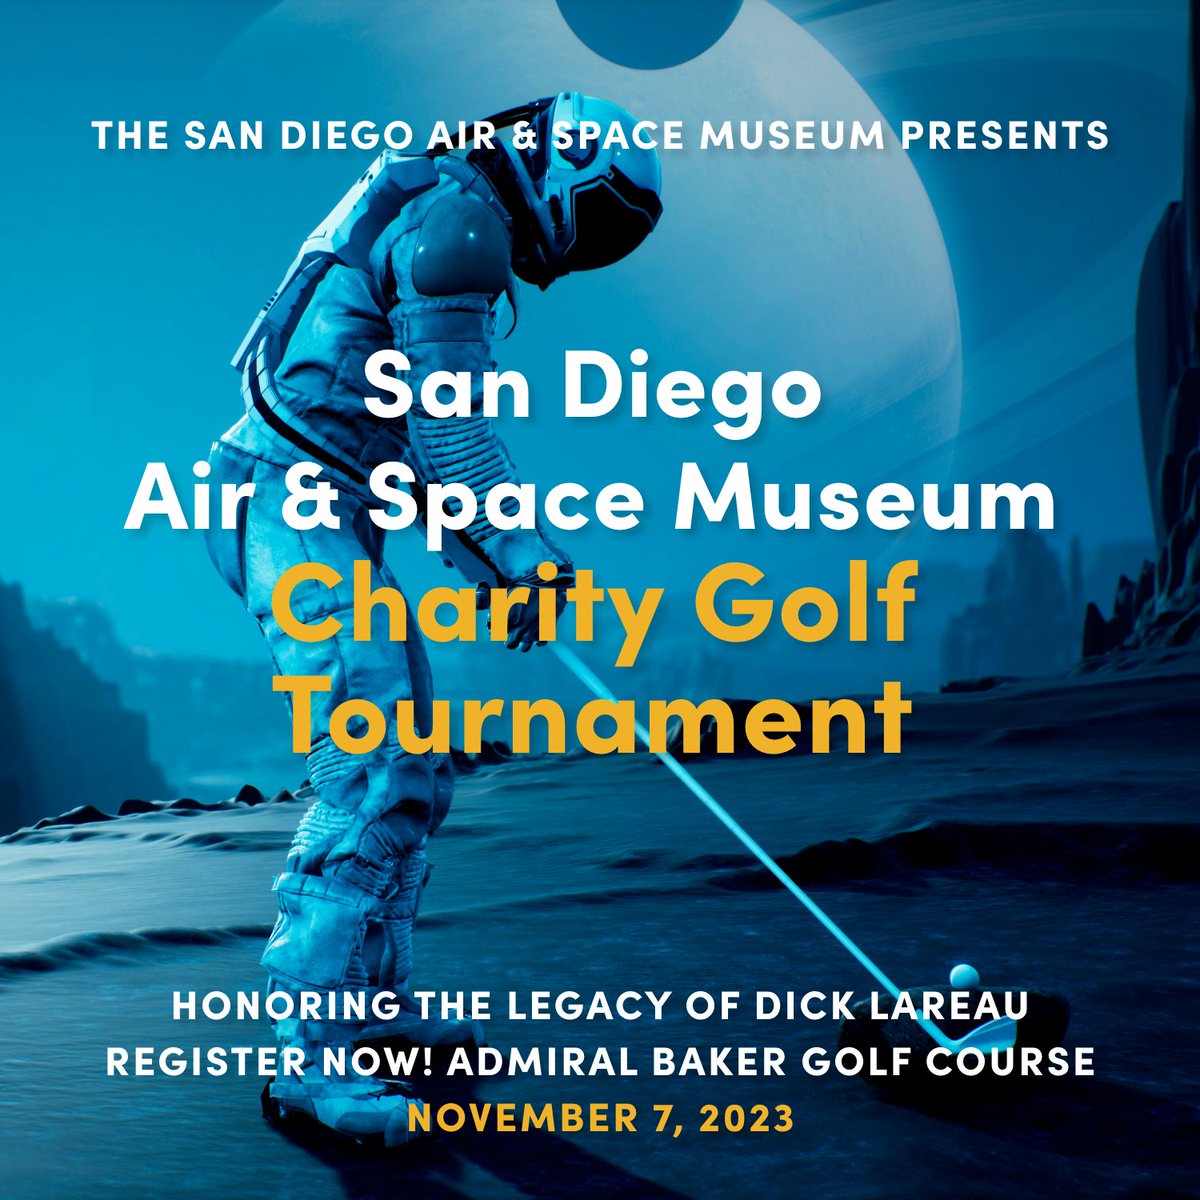 Attention golf enthusiasts! Our highly anticipated Golf Tournament is TOMORROW! Get ready for an exciting day at Admiral Baker Golf Course. Remember, check-in begins at 8:30 AM sharp. #GolfTournament #SwingForSuccess #CommunityGolf ️sandiegoairandspace.org/golf